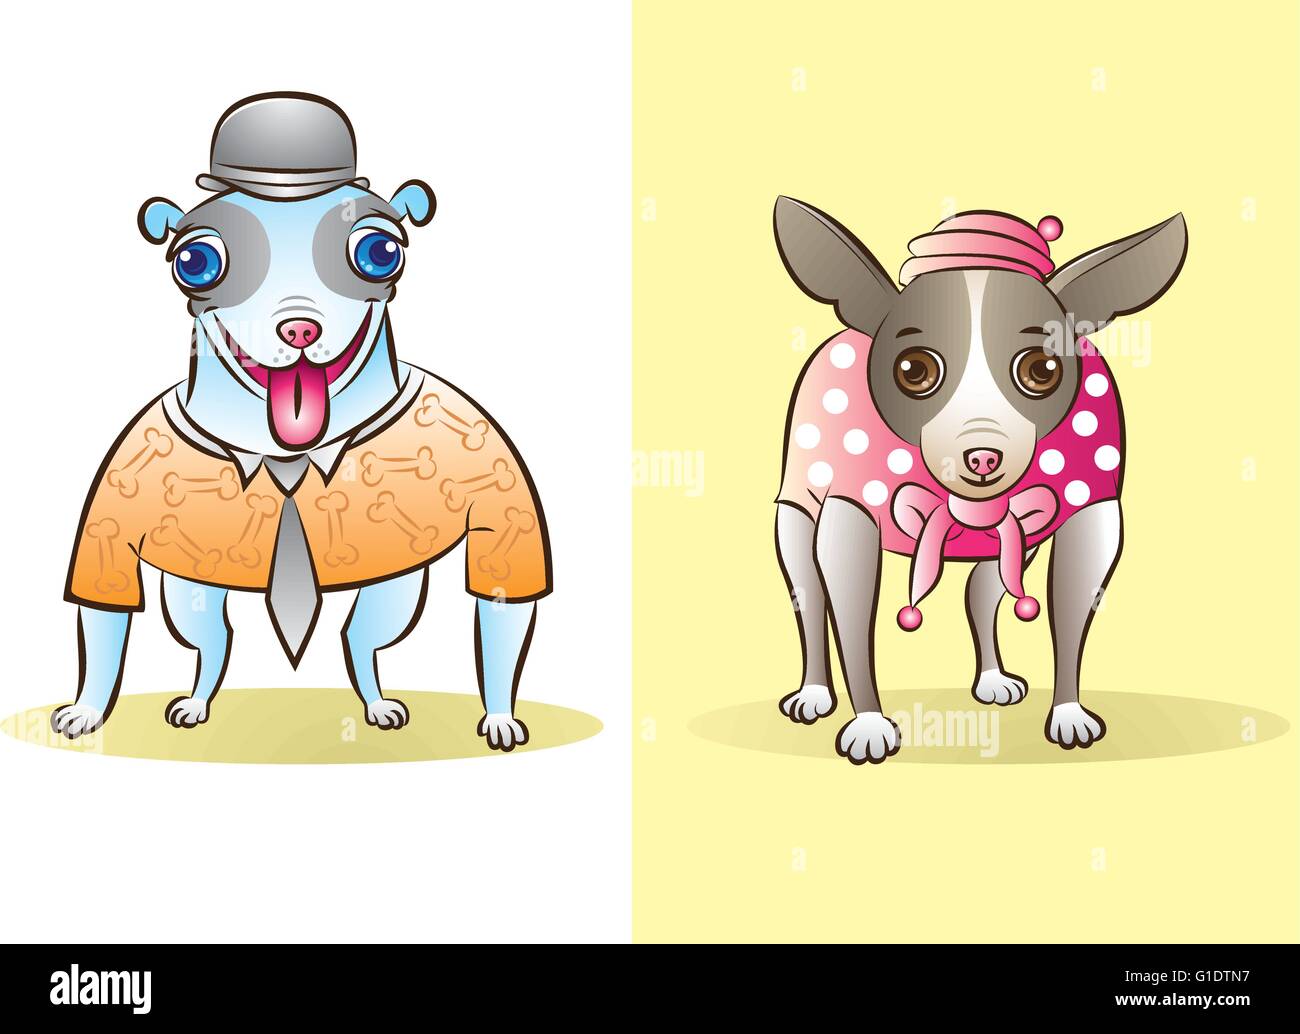 vector illustration of cute dressed up dogs in fashion style Stock Vector